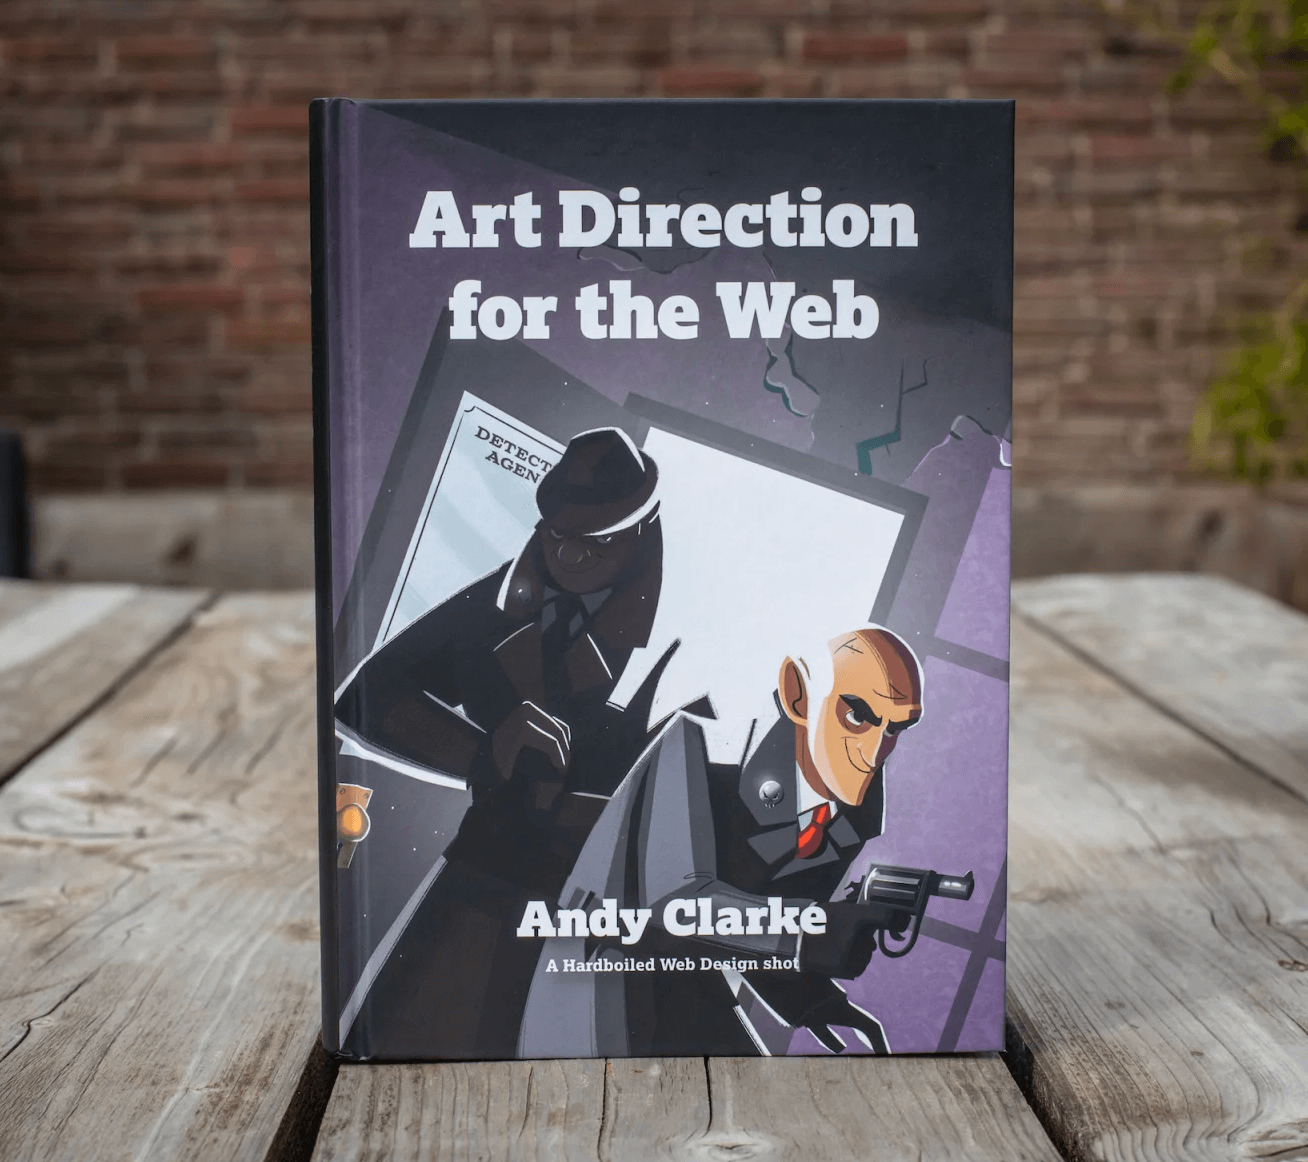   Art Direction for the Web